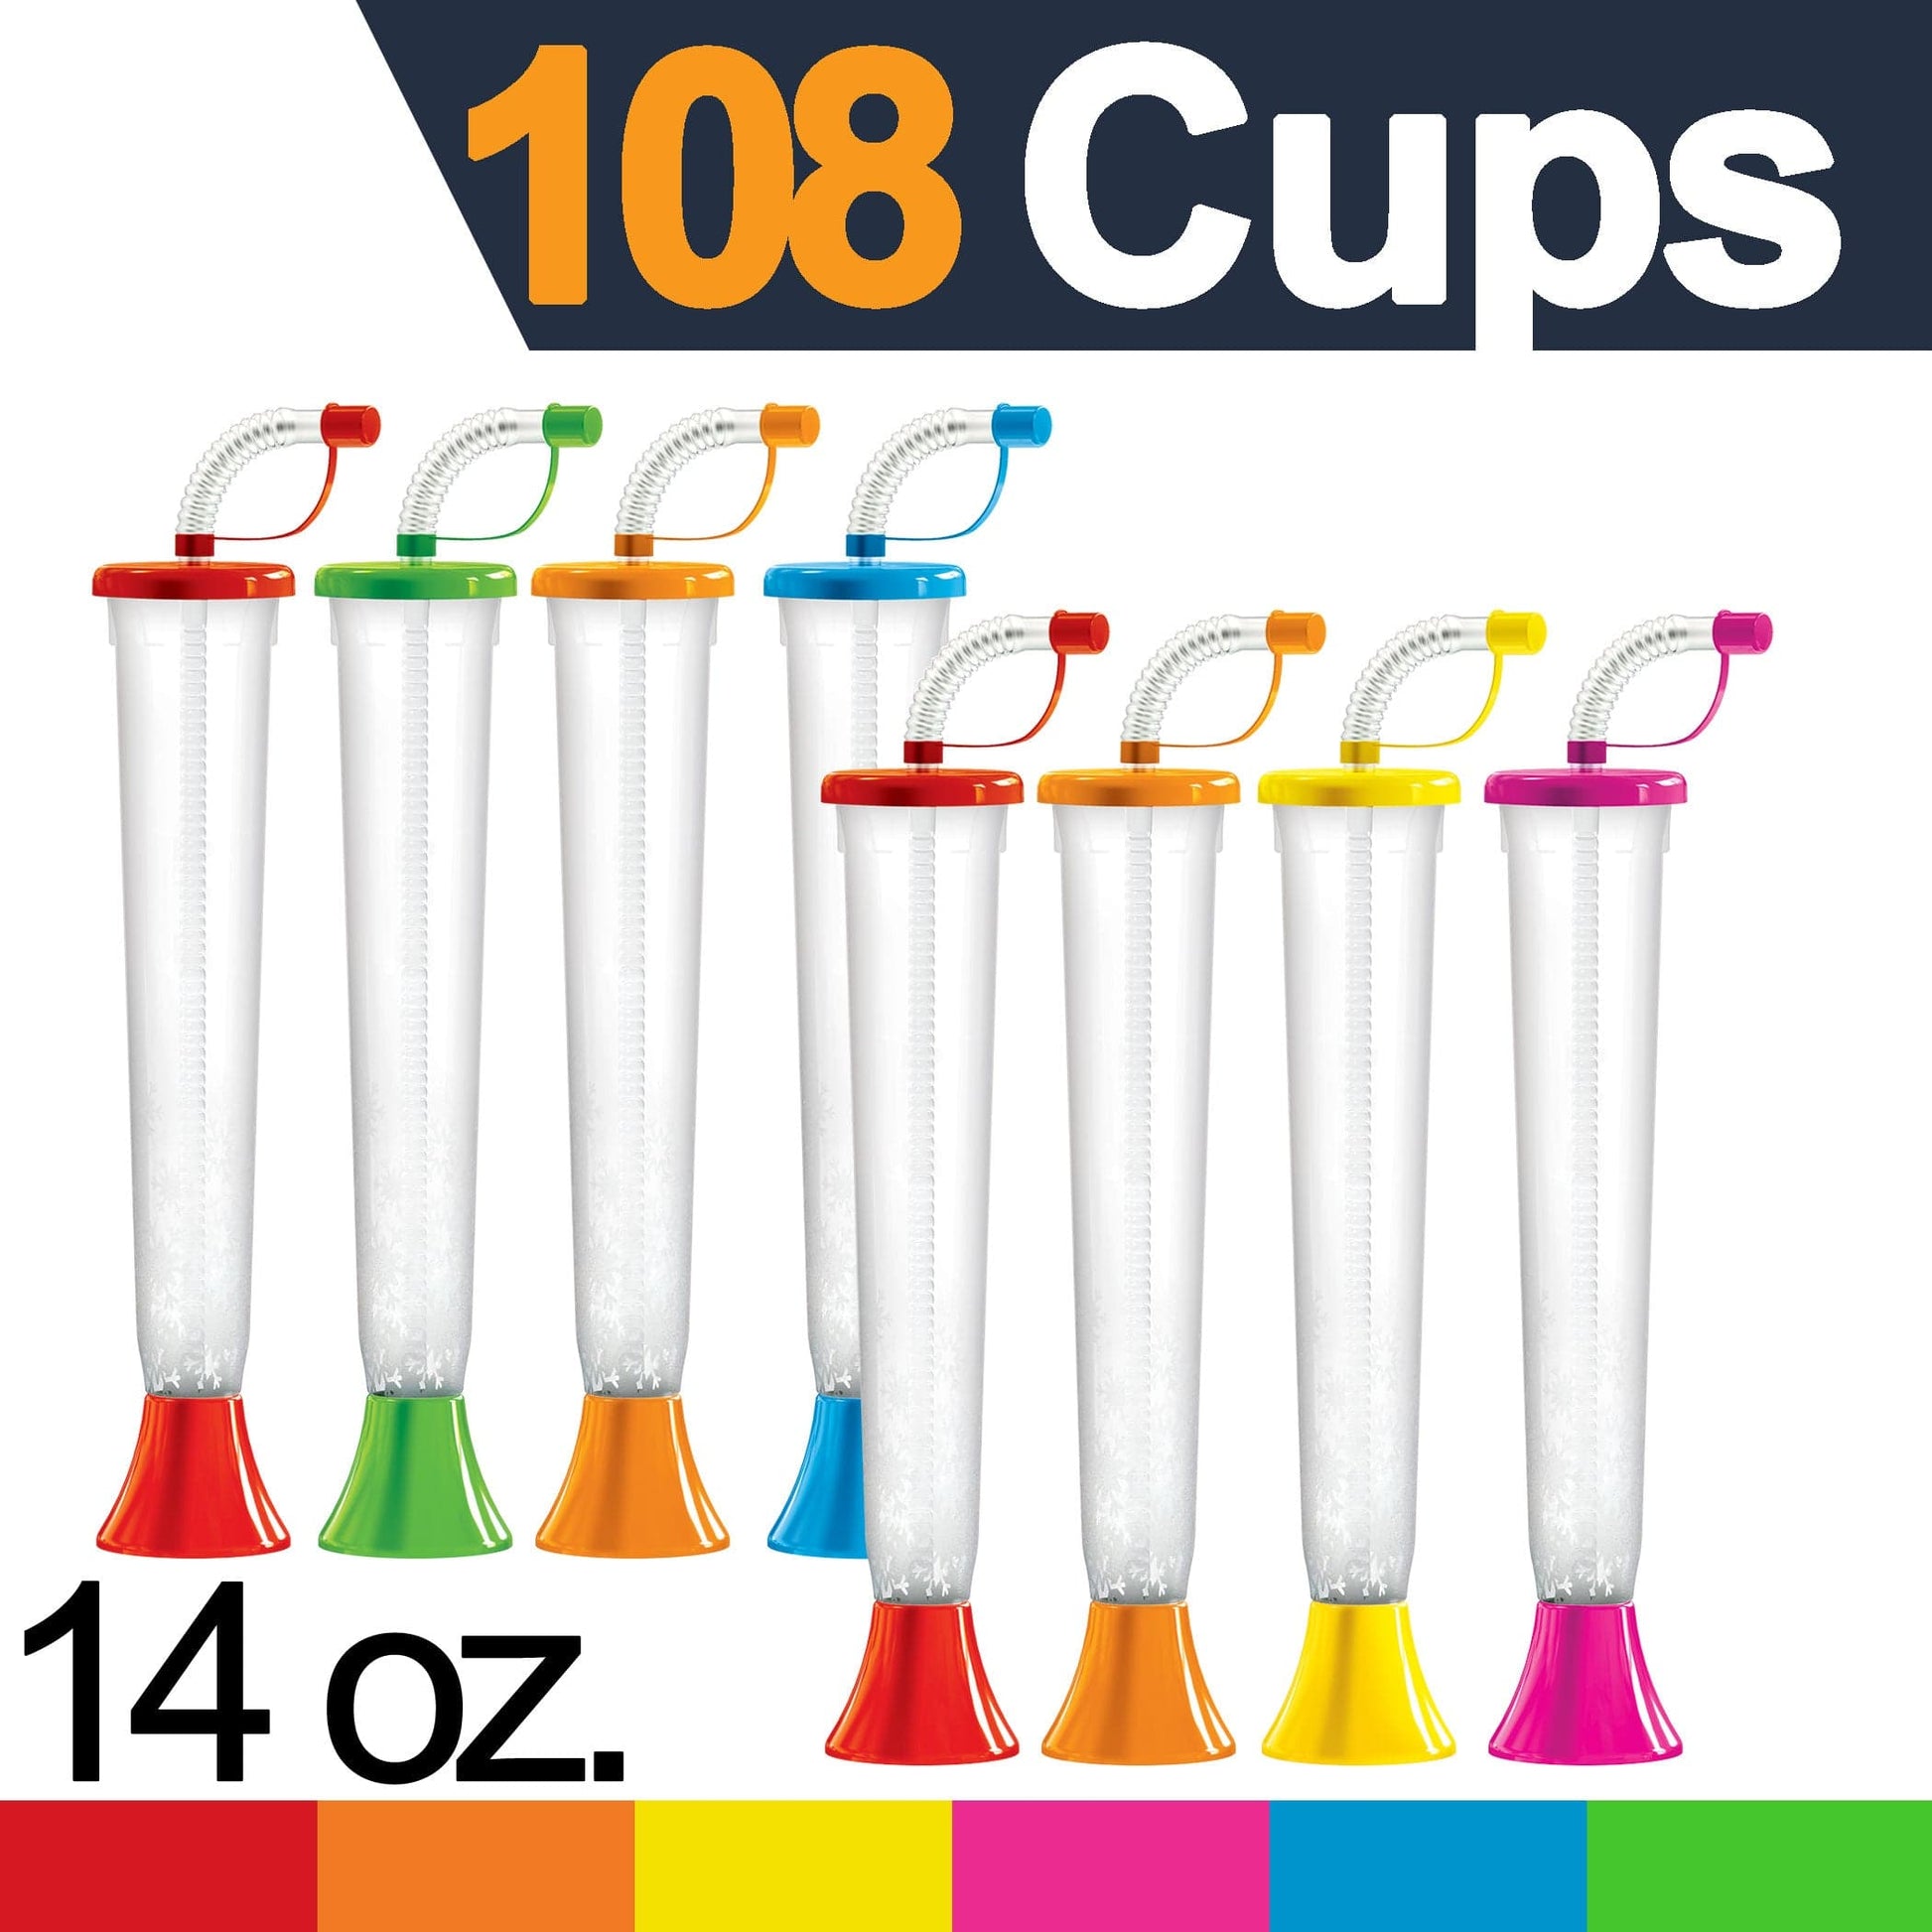 https://noveltycupsusa.com/cdn/shop/products/sweet-world-usa-yard-cups-108-cups-yard-cups-variety-pack-14oz-for-margaritas-cold-and-frozen-drinks-red-orange-yellow-pink-blue-and-lime-lids-and-straws-sw-40000f-v-cups-with-lids-an.jpg?v=1684775145&width=1946